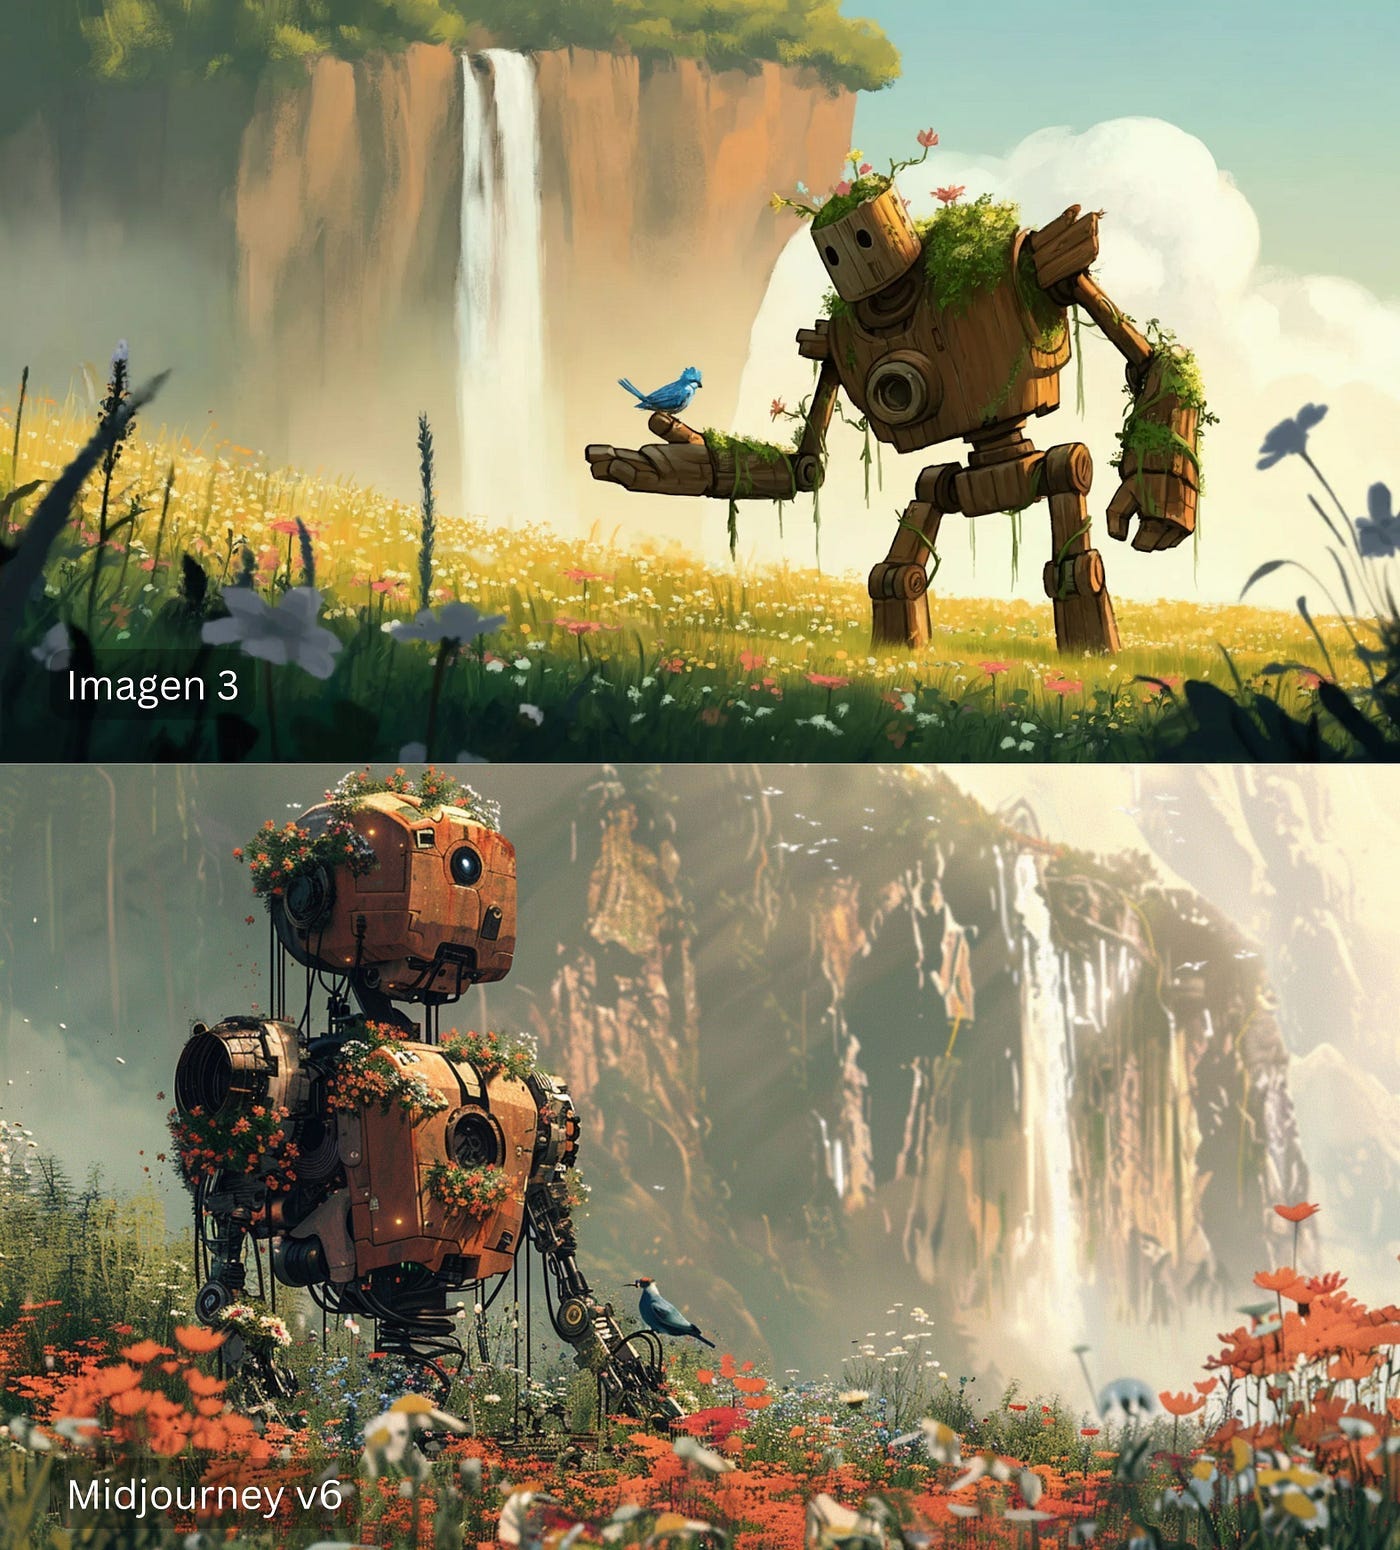 A weathered, wooden mech robot covered in flowering vines stands peacefully in a field of tall wildflowers, with a small bluebird resting on its outstretched hand. Digital cartoon, with warm colors and soft lines. A large cliff with a waterfall looms behind.